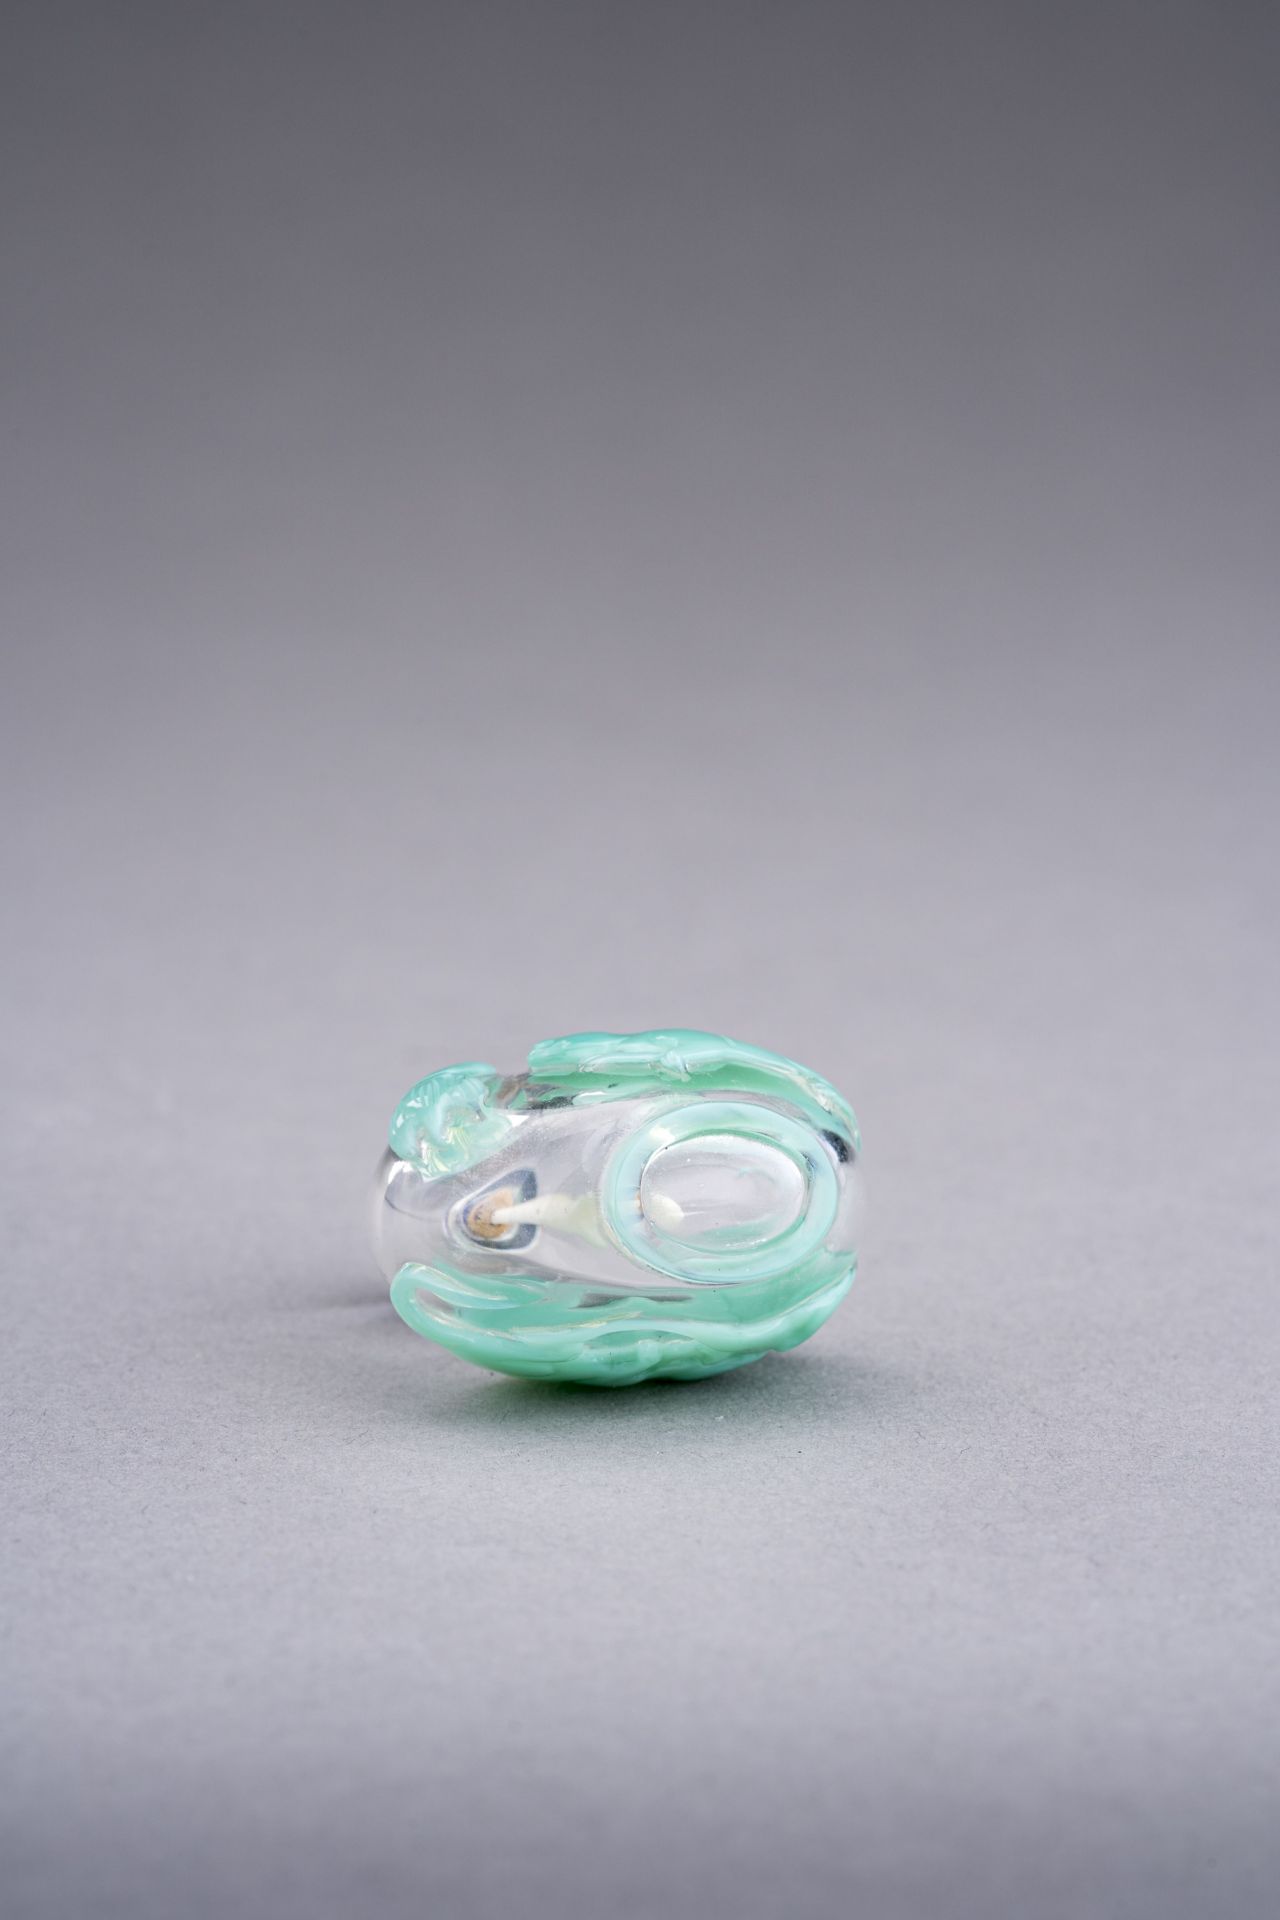 A TURQUOISE OVERLAY GLASS 'RATS' SNUFF BOTTLE, c. 1920s - Image 7 of 7